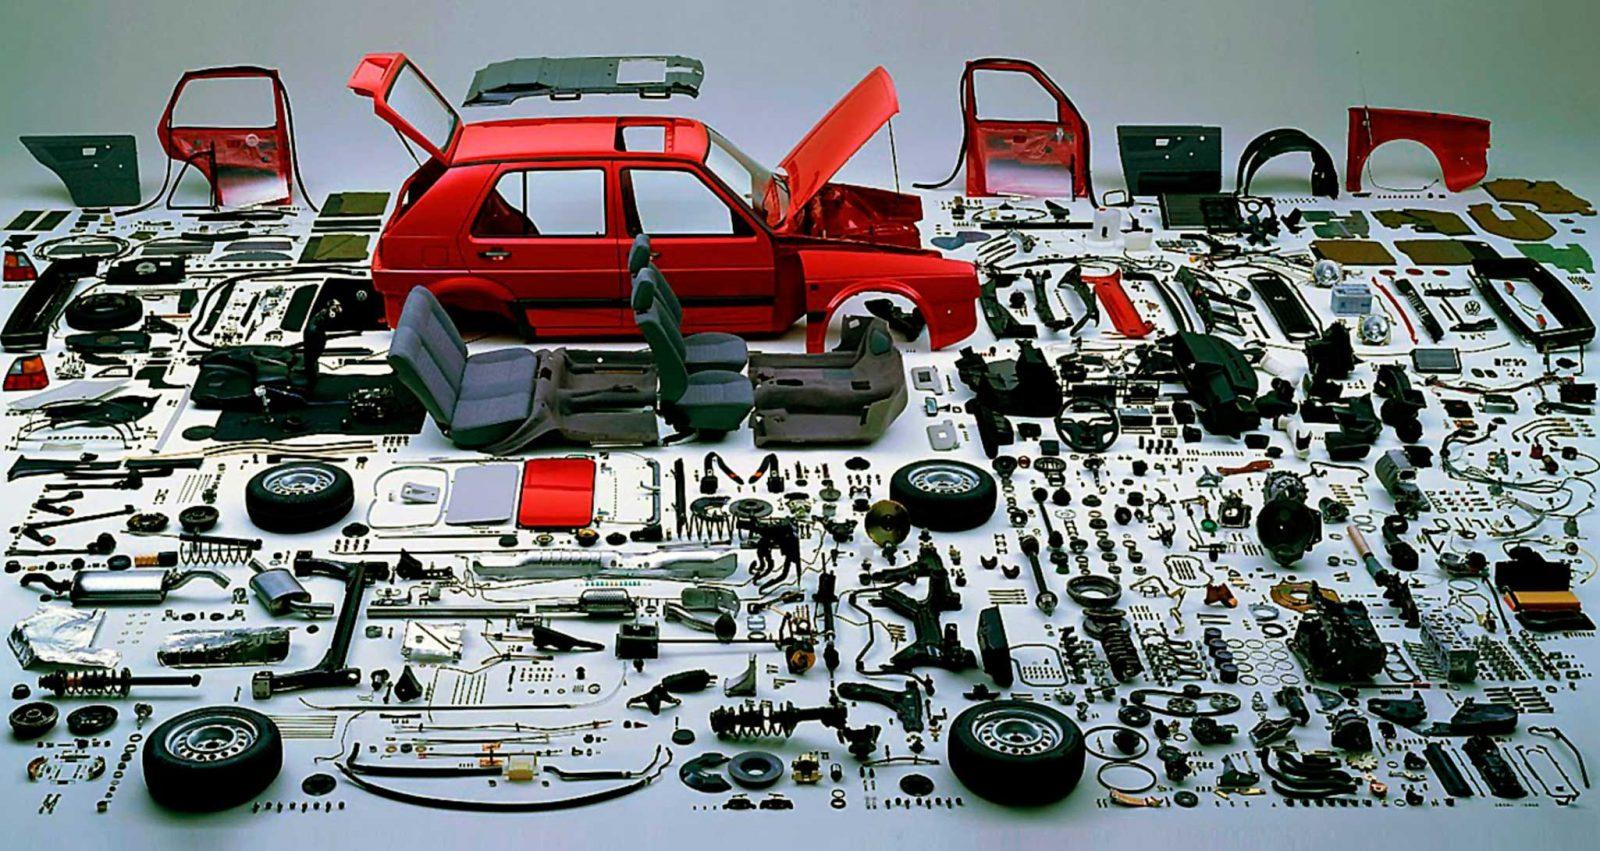 Image of Japanese project of manufacturing spare parts from glass for cars